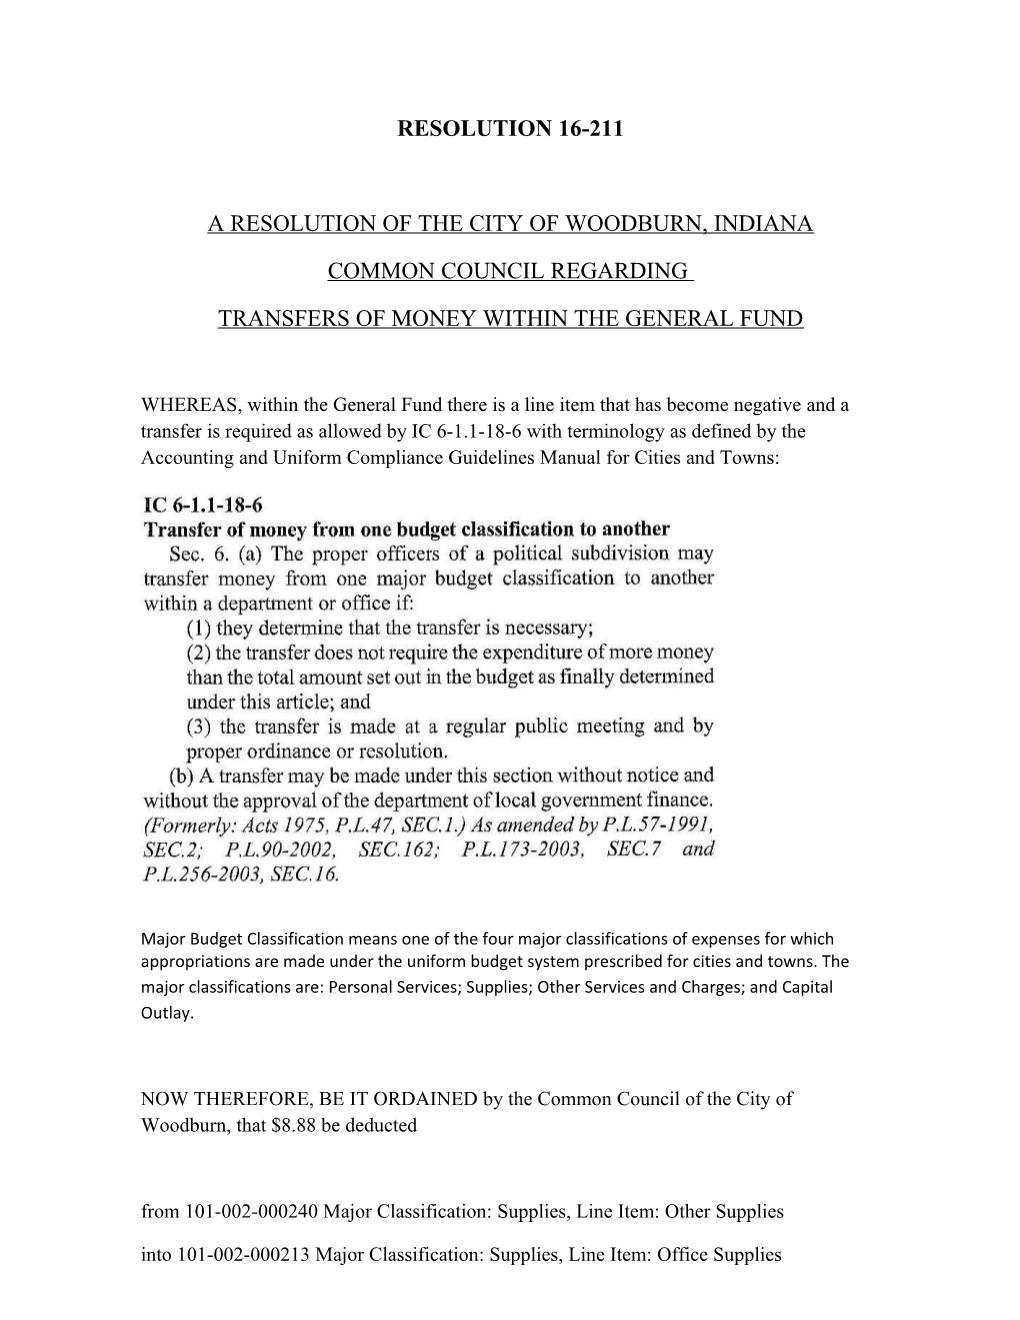 A Resolution of the City of Woodburn, Indiana